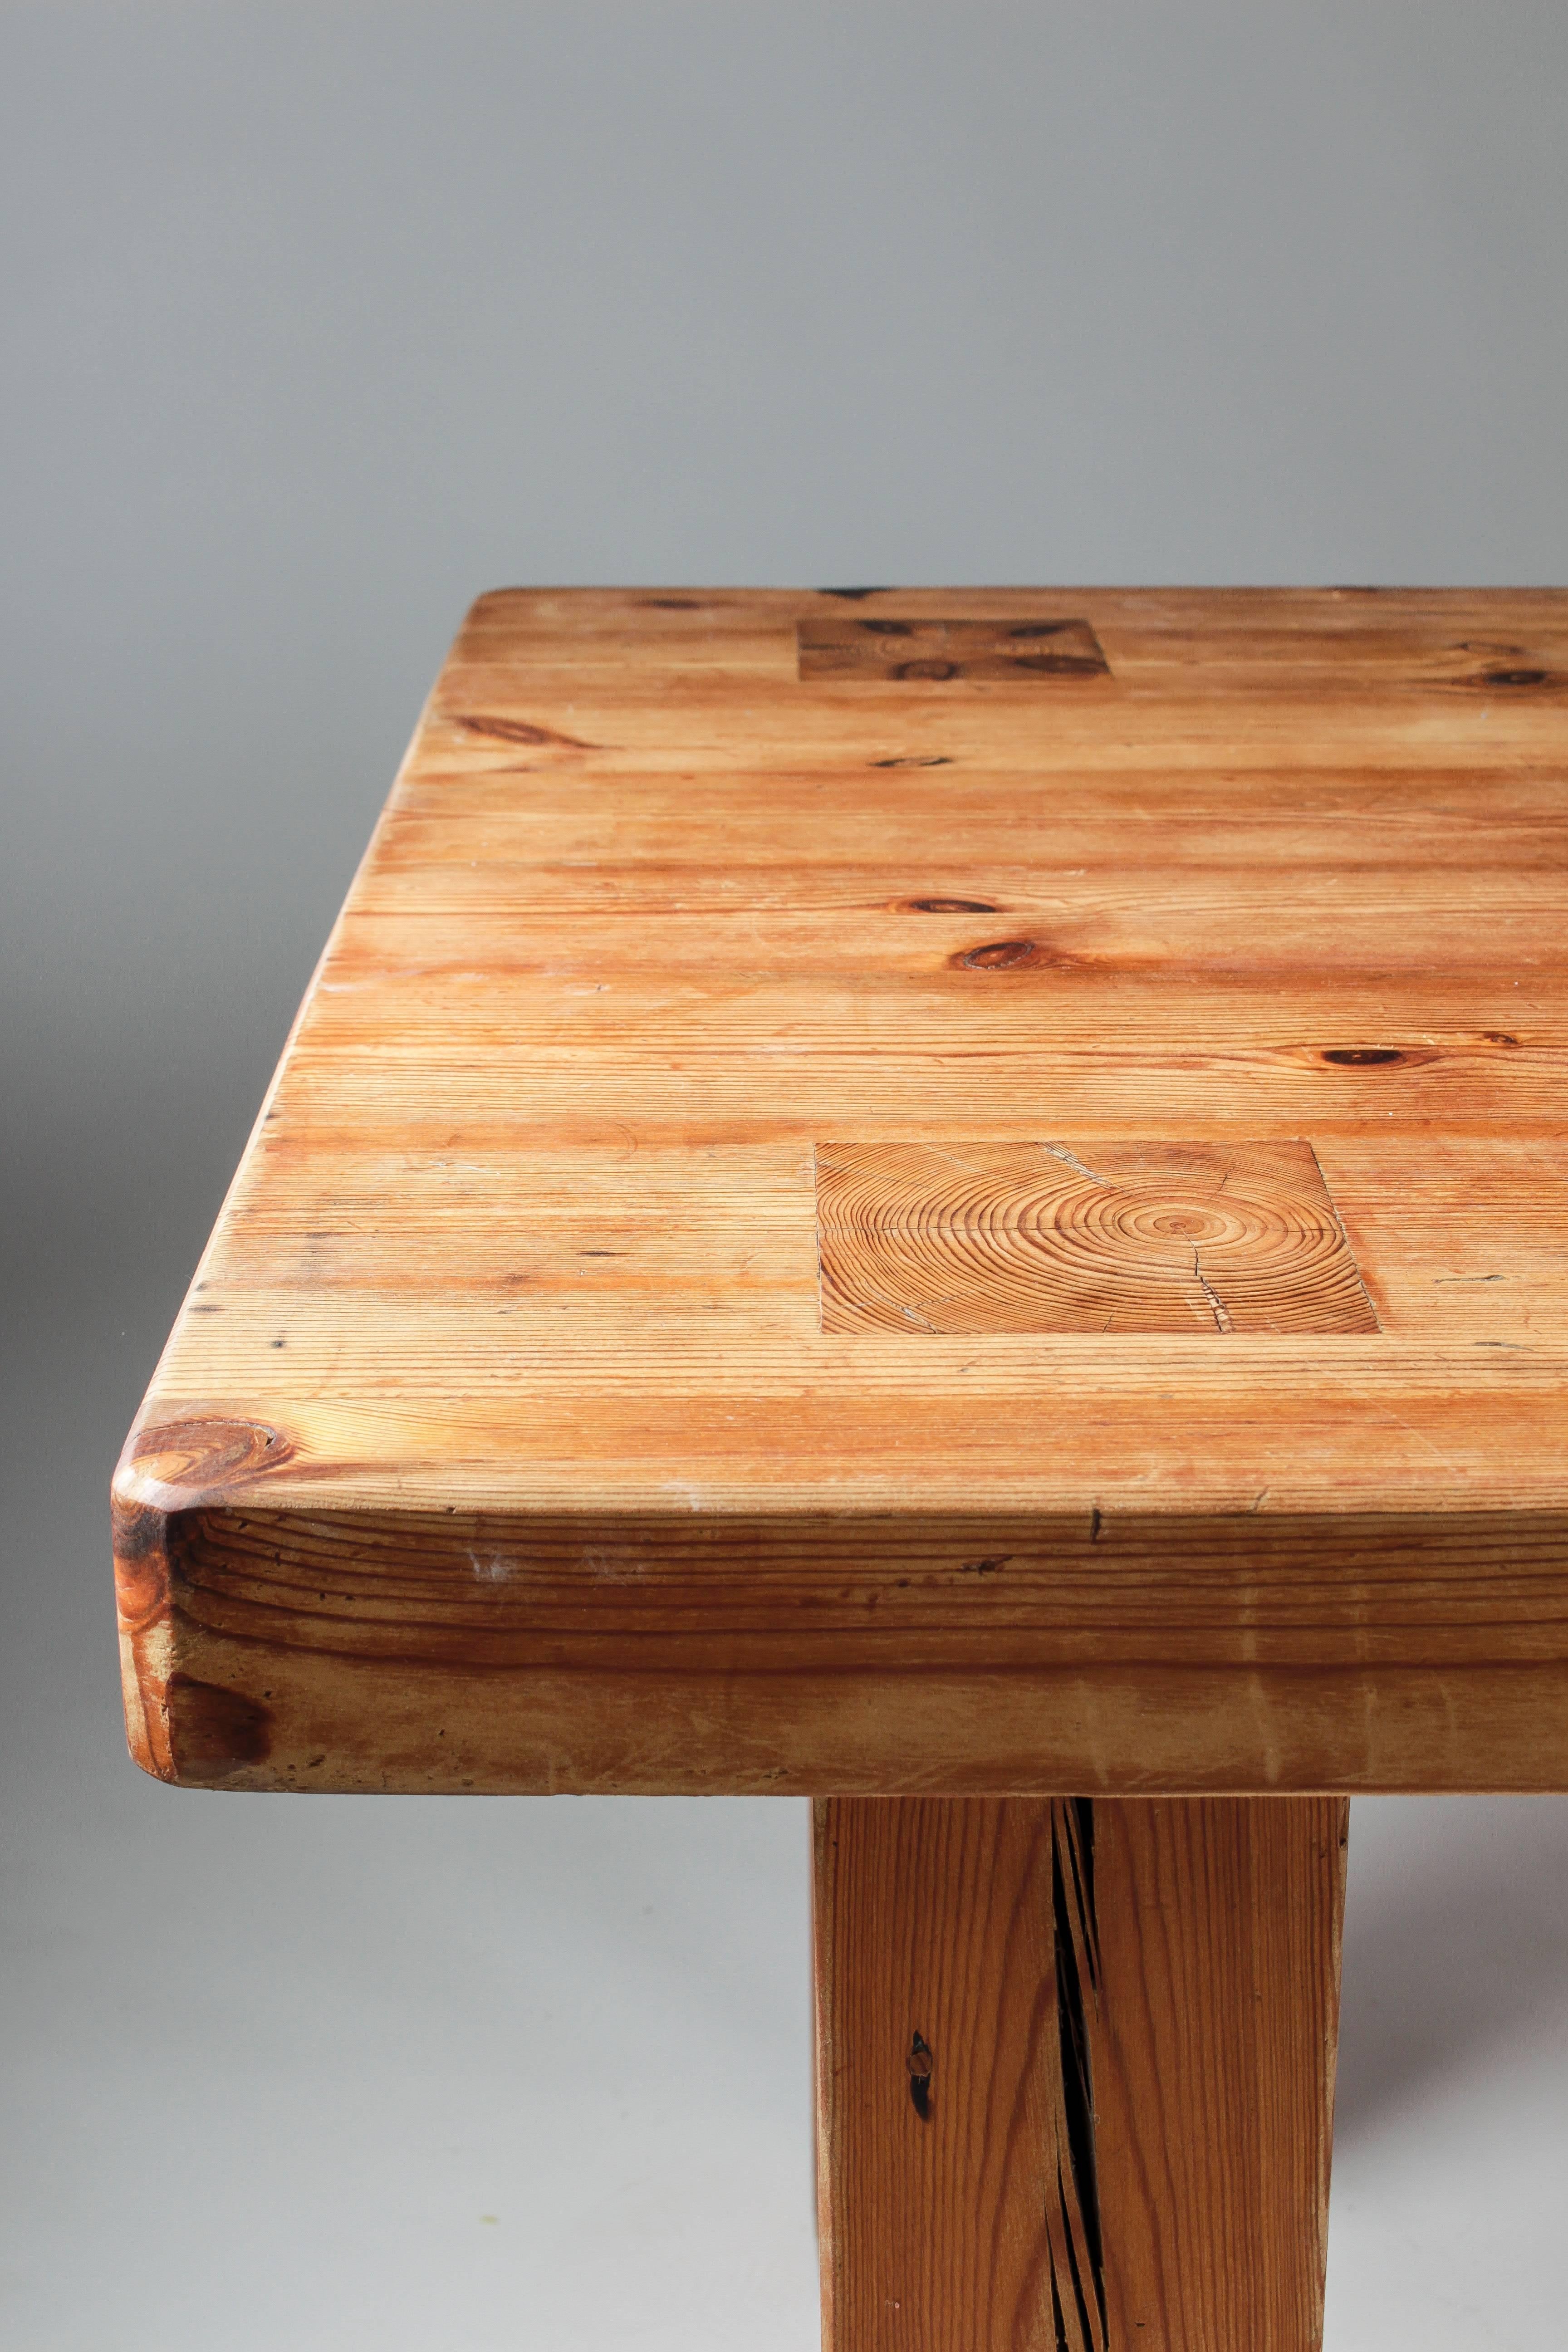 Pine Swedish Table Made of Wood from an Old Barn